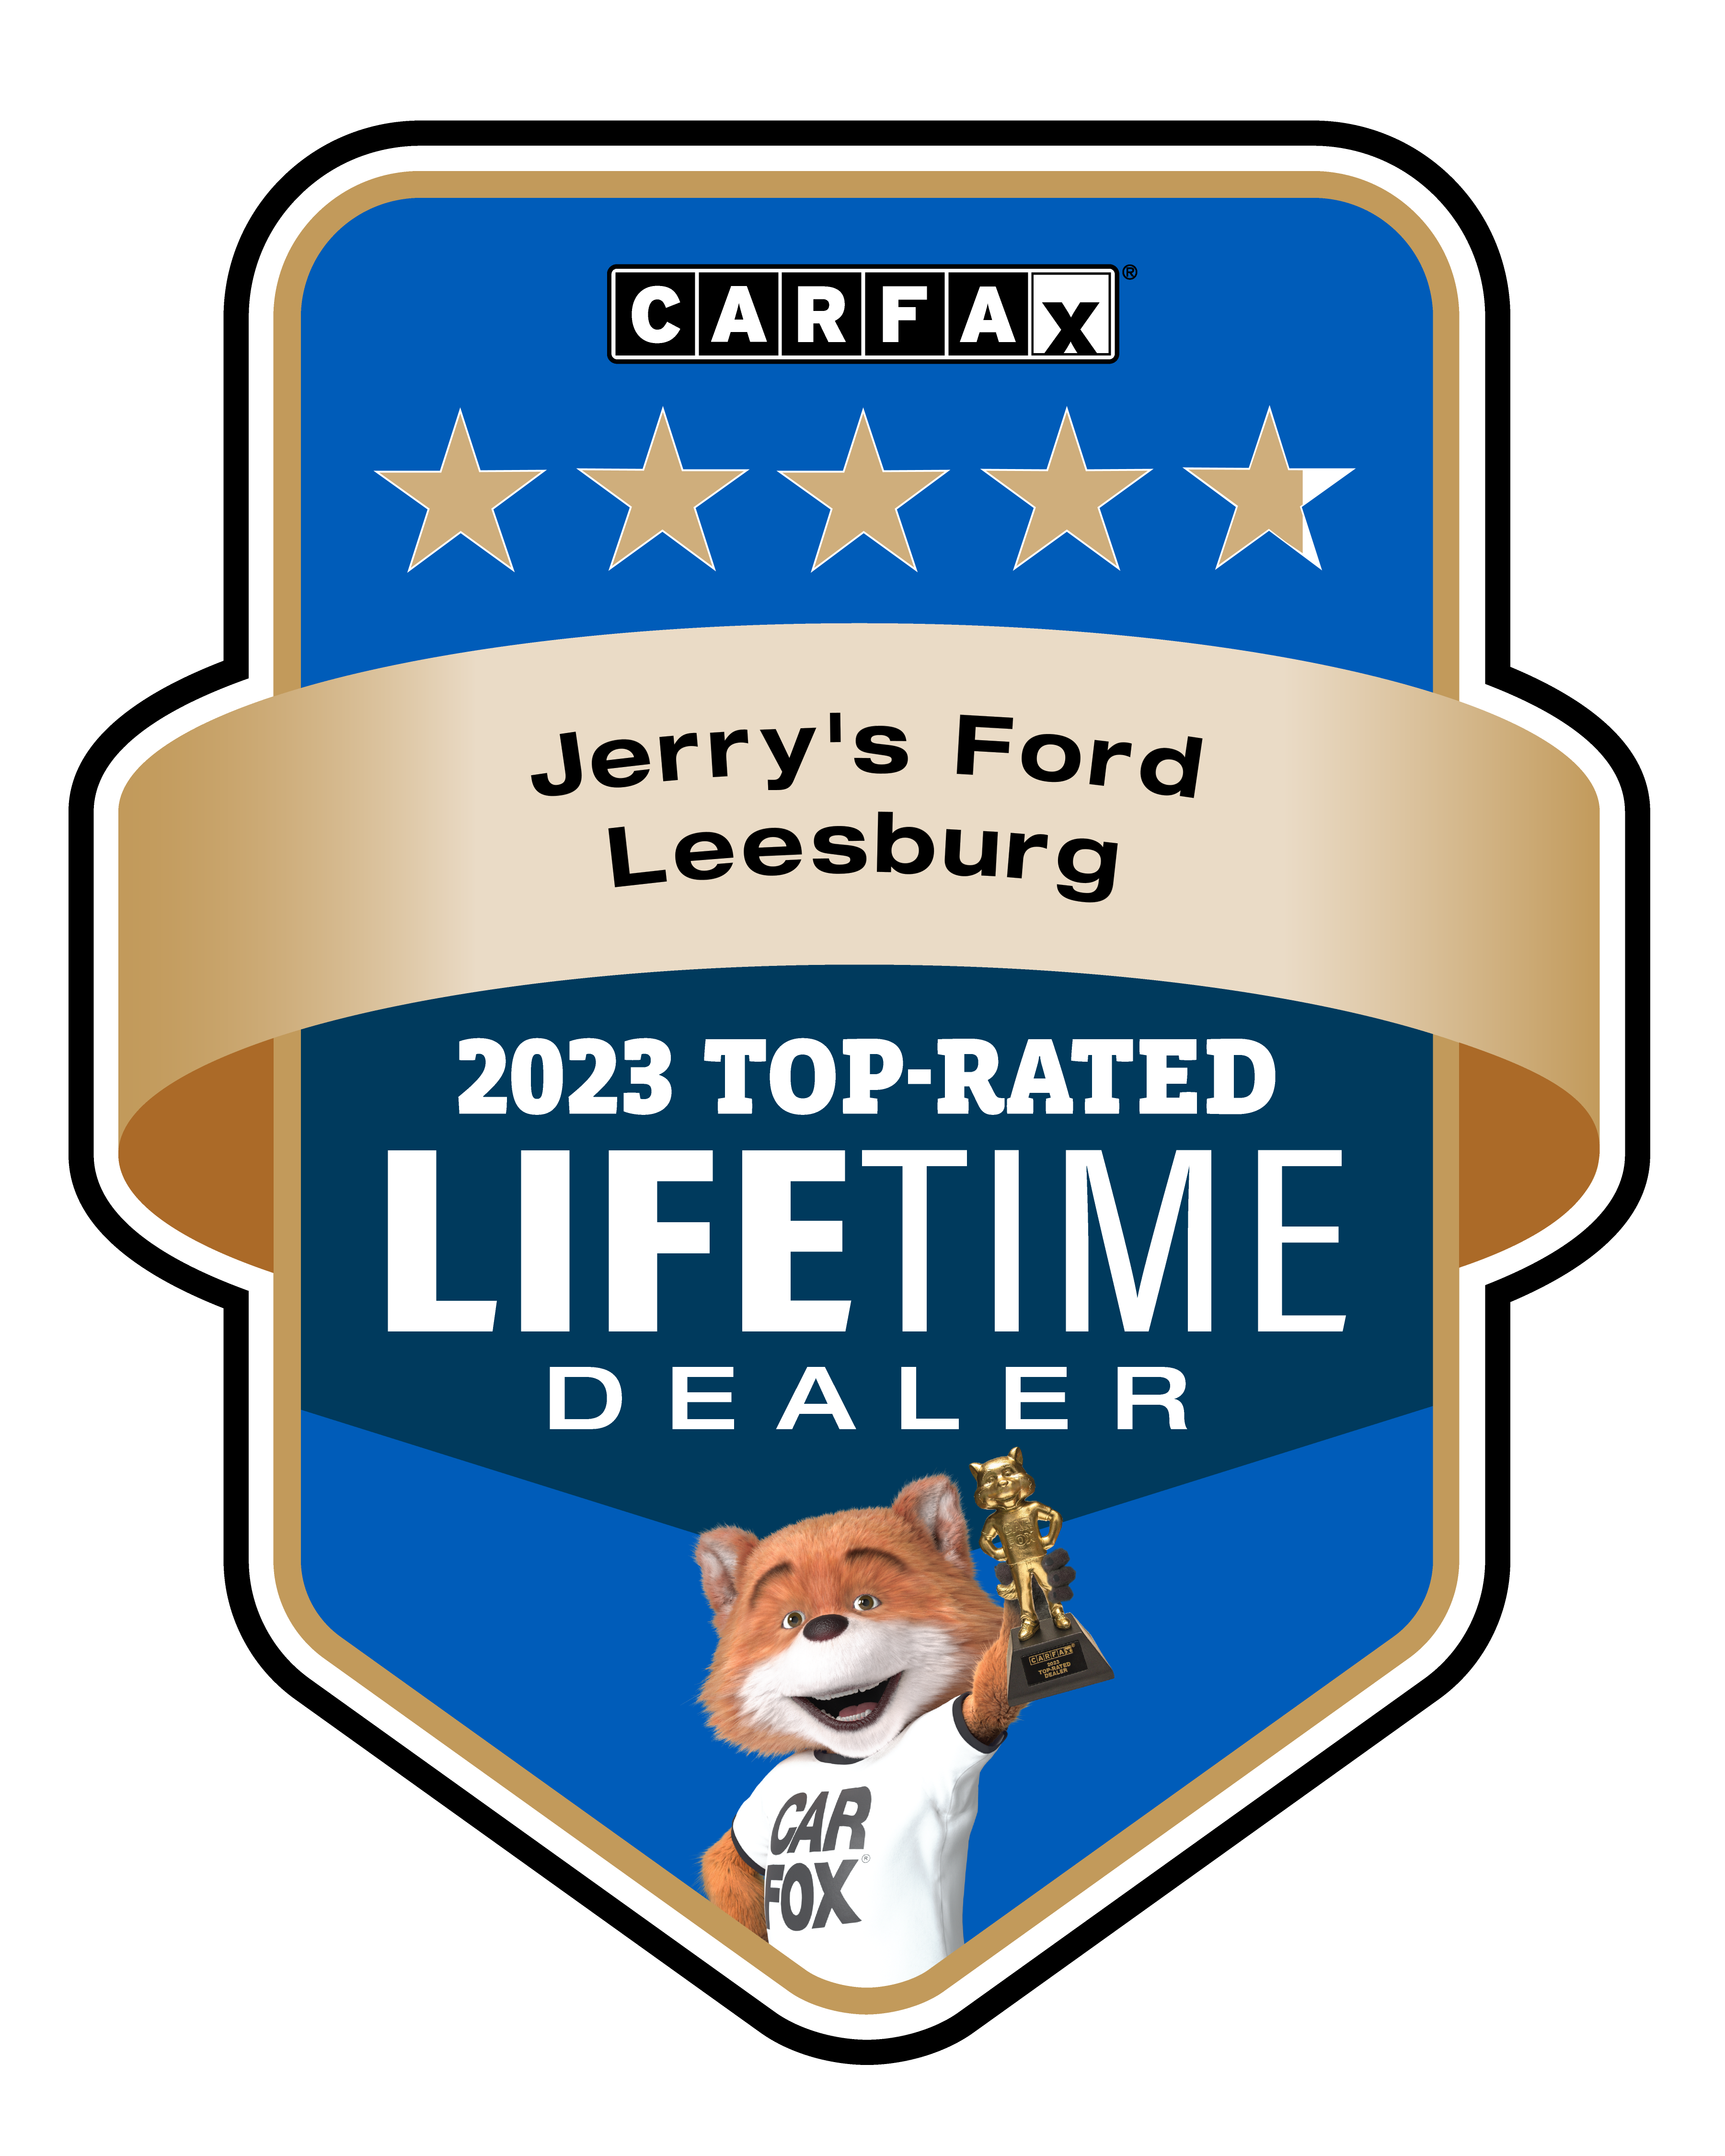 Jerry's Leesburg Ford Carfax 2022 Top-Rated Dealer